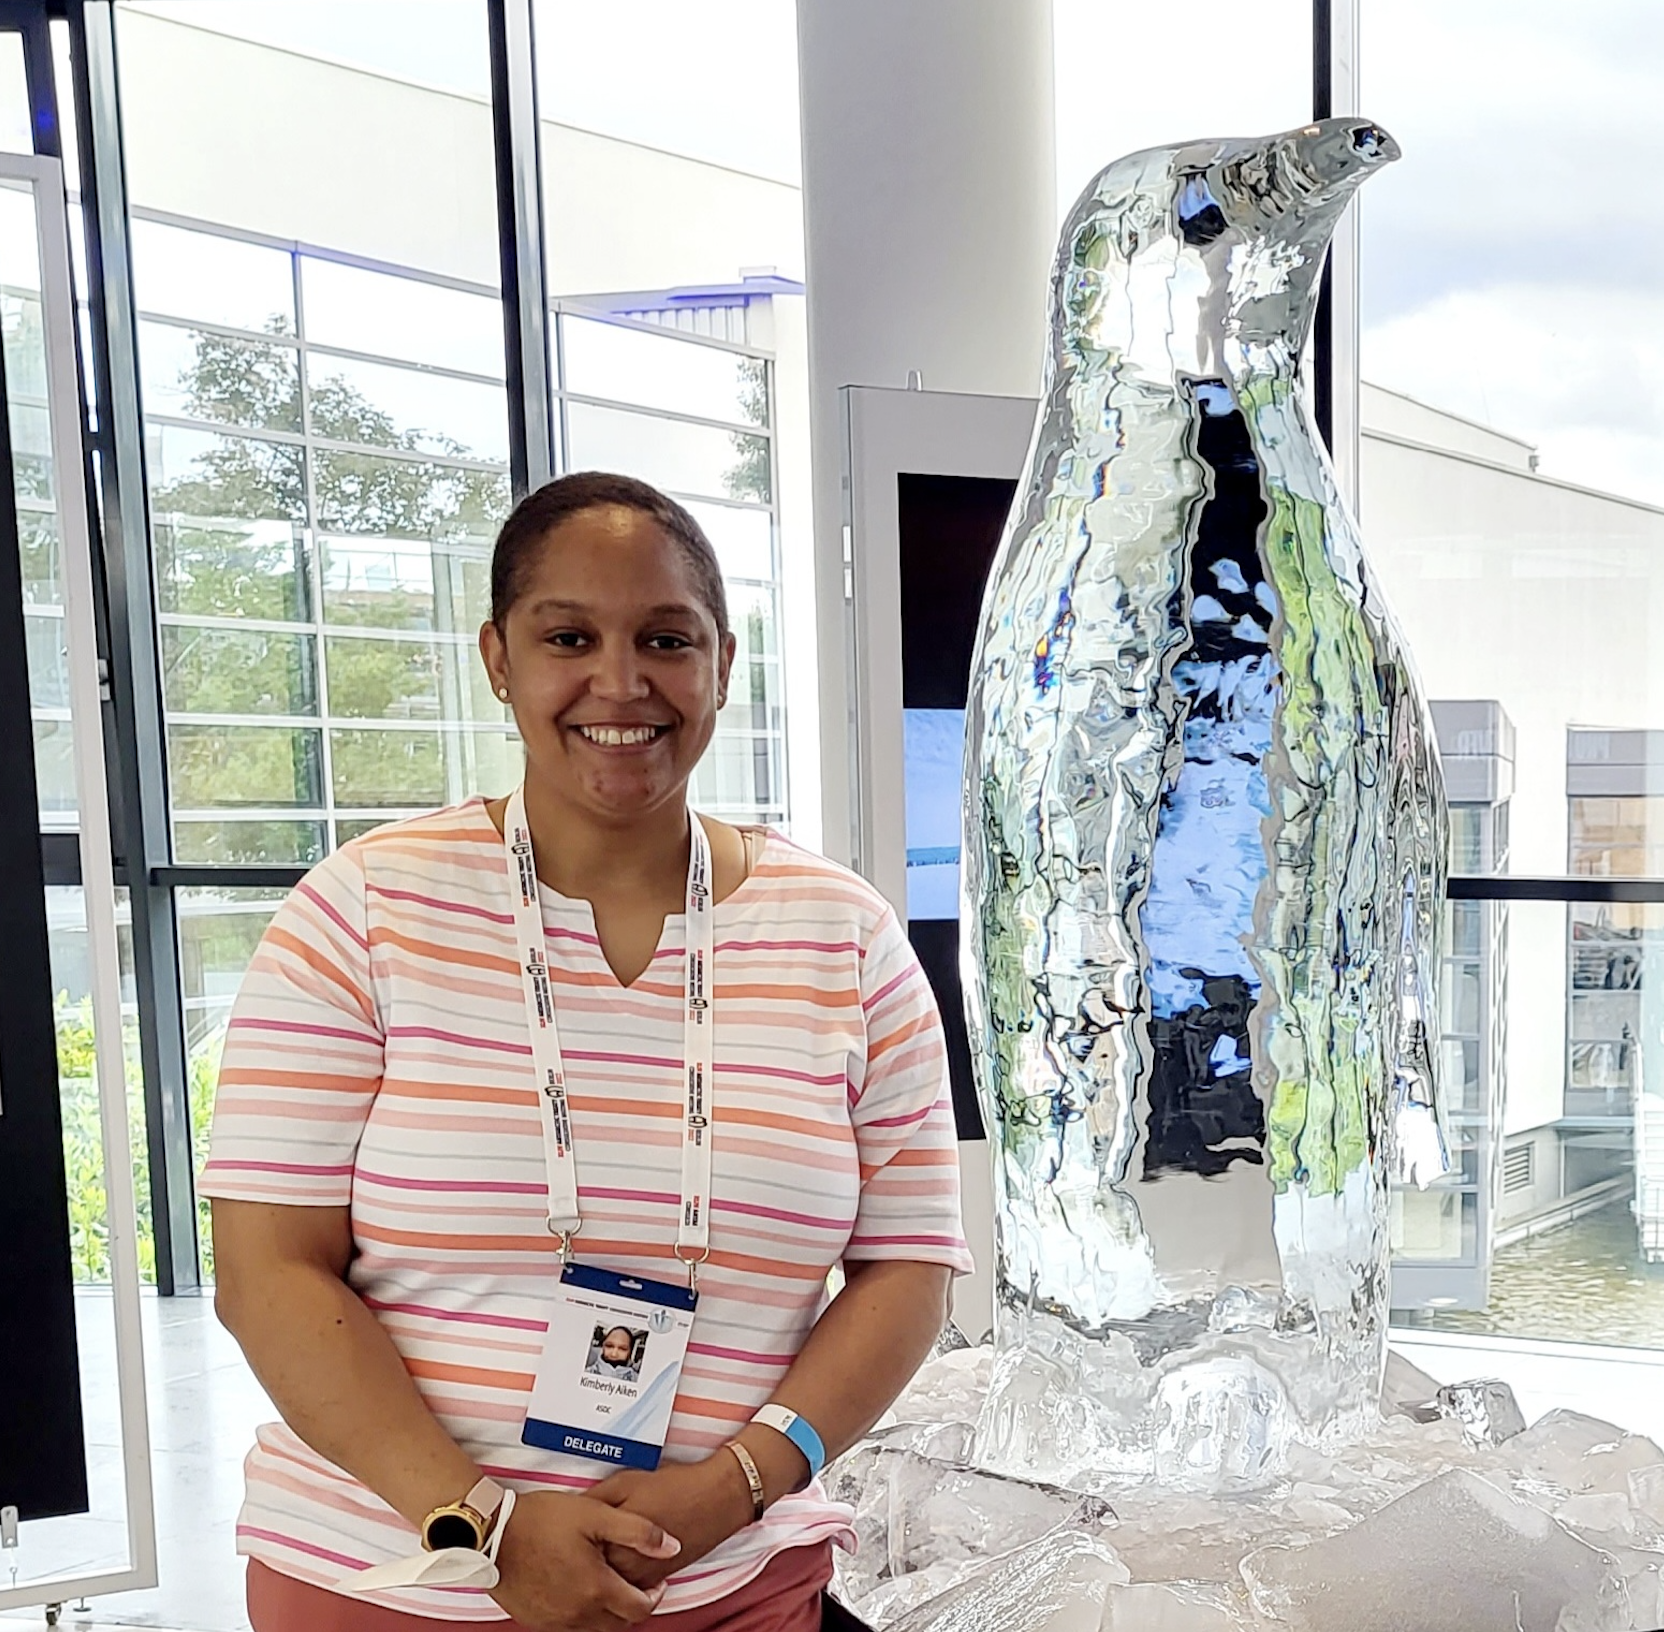 Kimberly Aiken, wearing an orange, white and pink striped shirt, pink trousers, and a lanyard stands beside an ice sculpture of a penguin